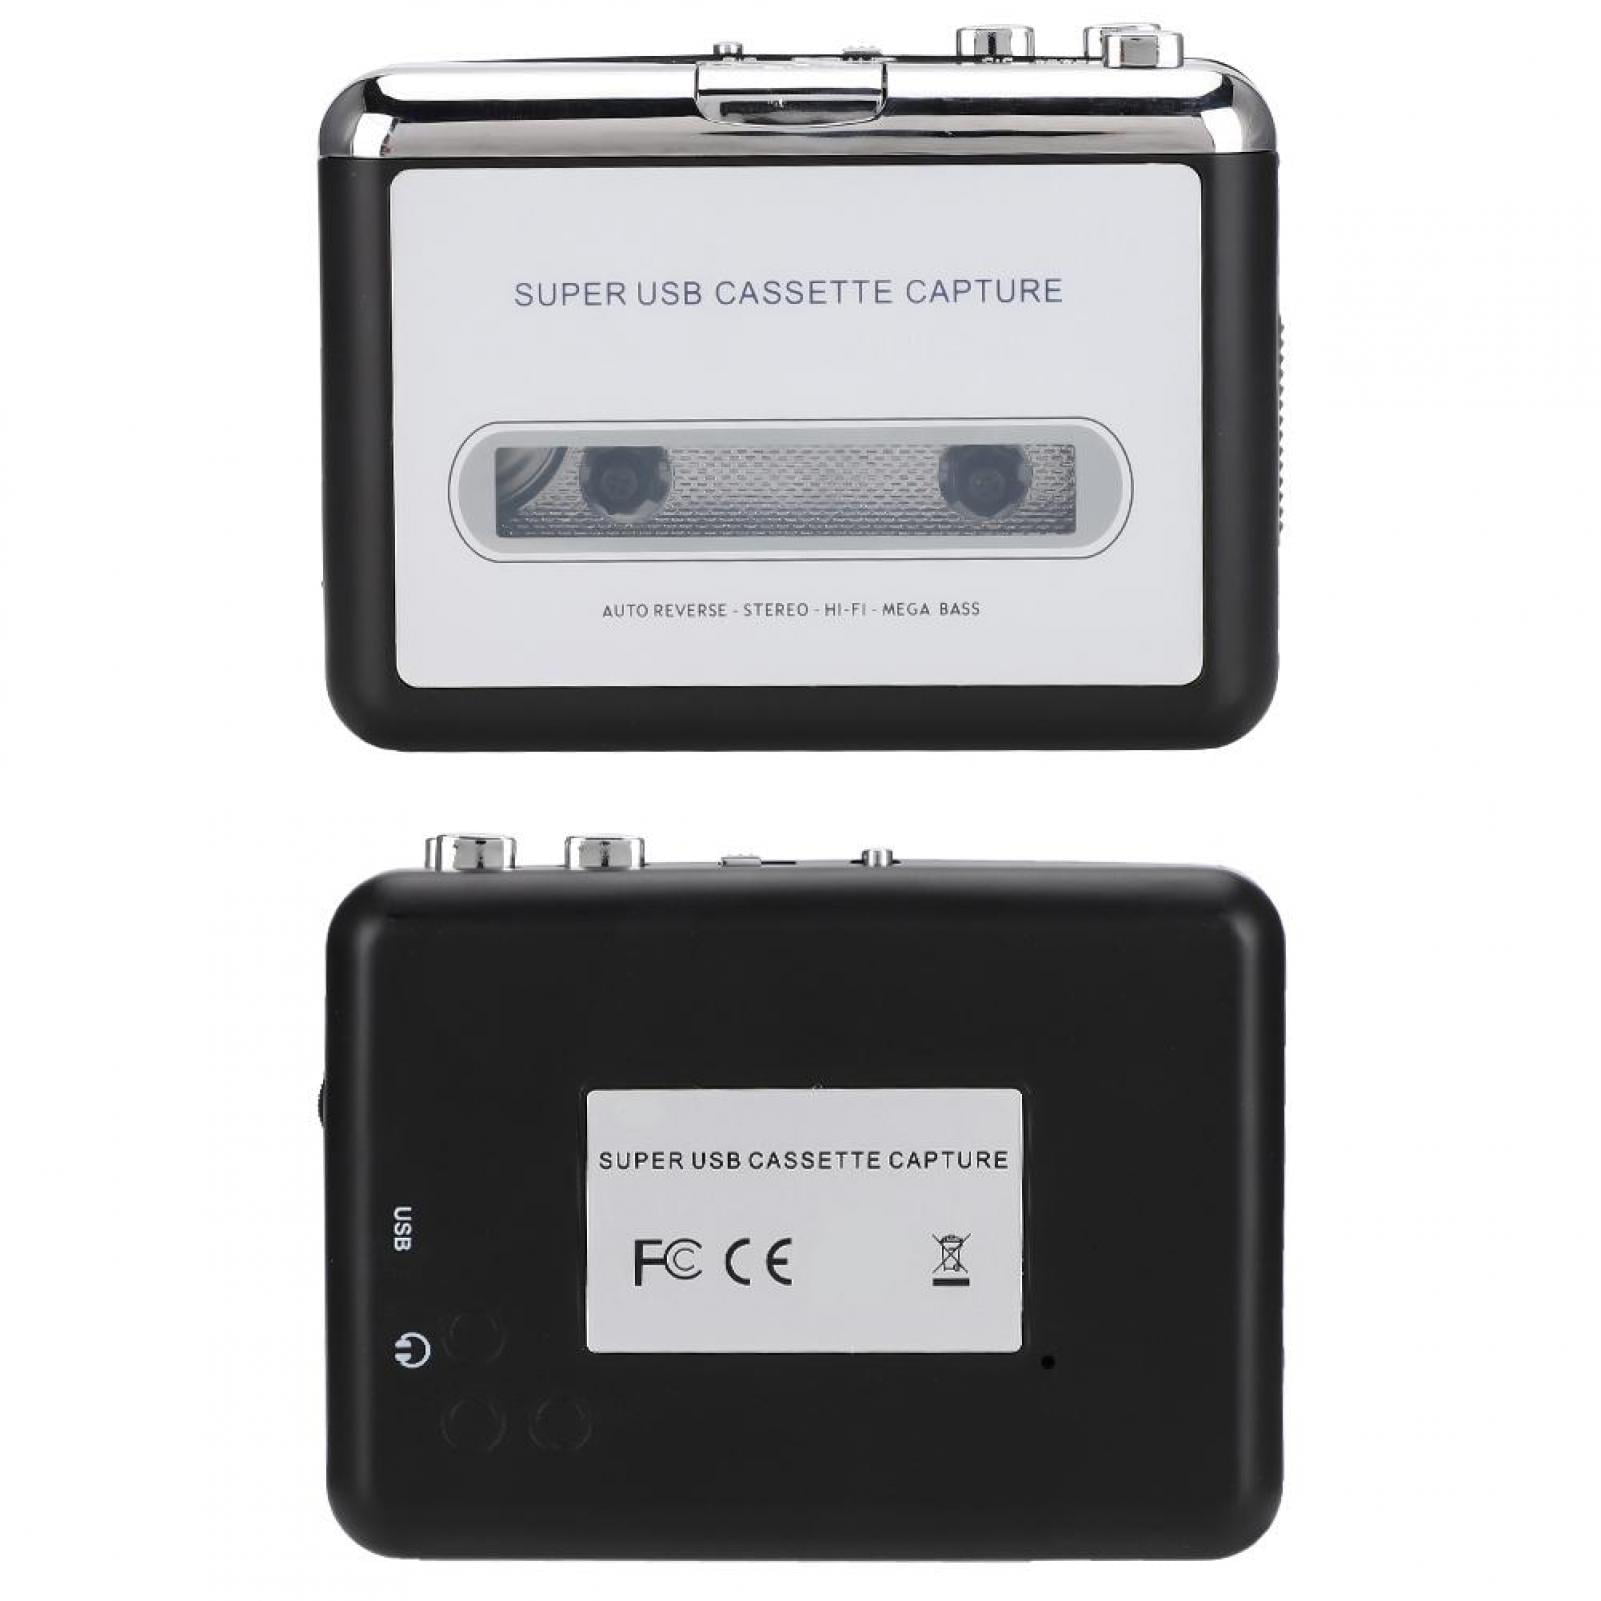 USB Cassette Player from Tapes to MP3,Portable Tape Player Audio Music Player Cassette Player for Windows 2000/XP/Vista/Seven.8.10. Cassette to MP3 Converter